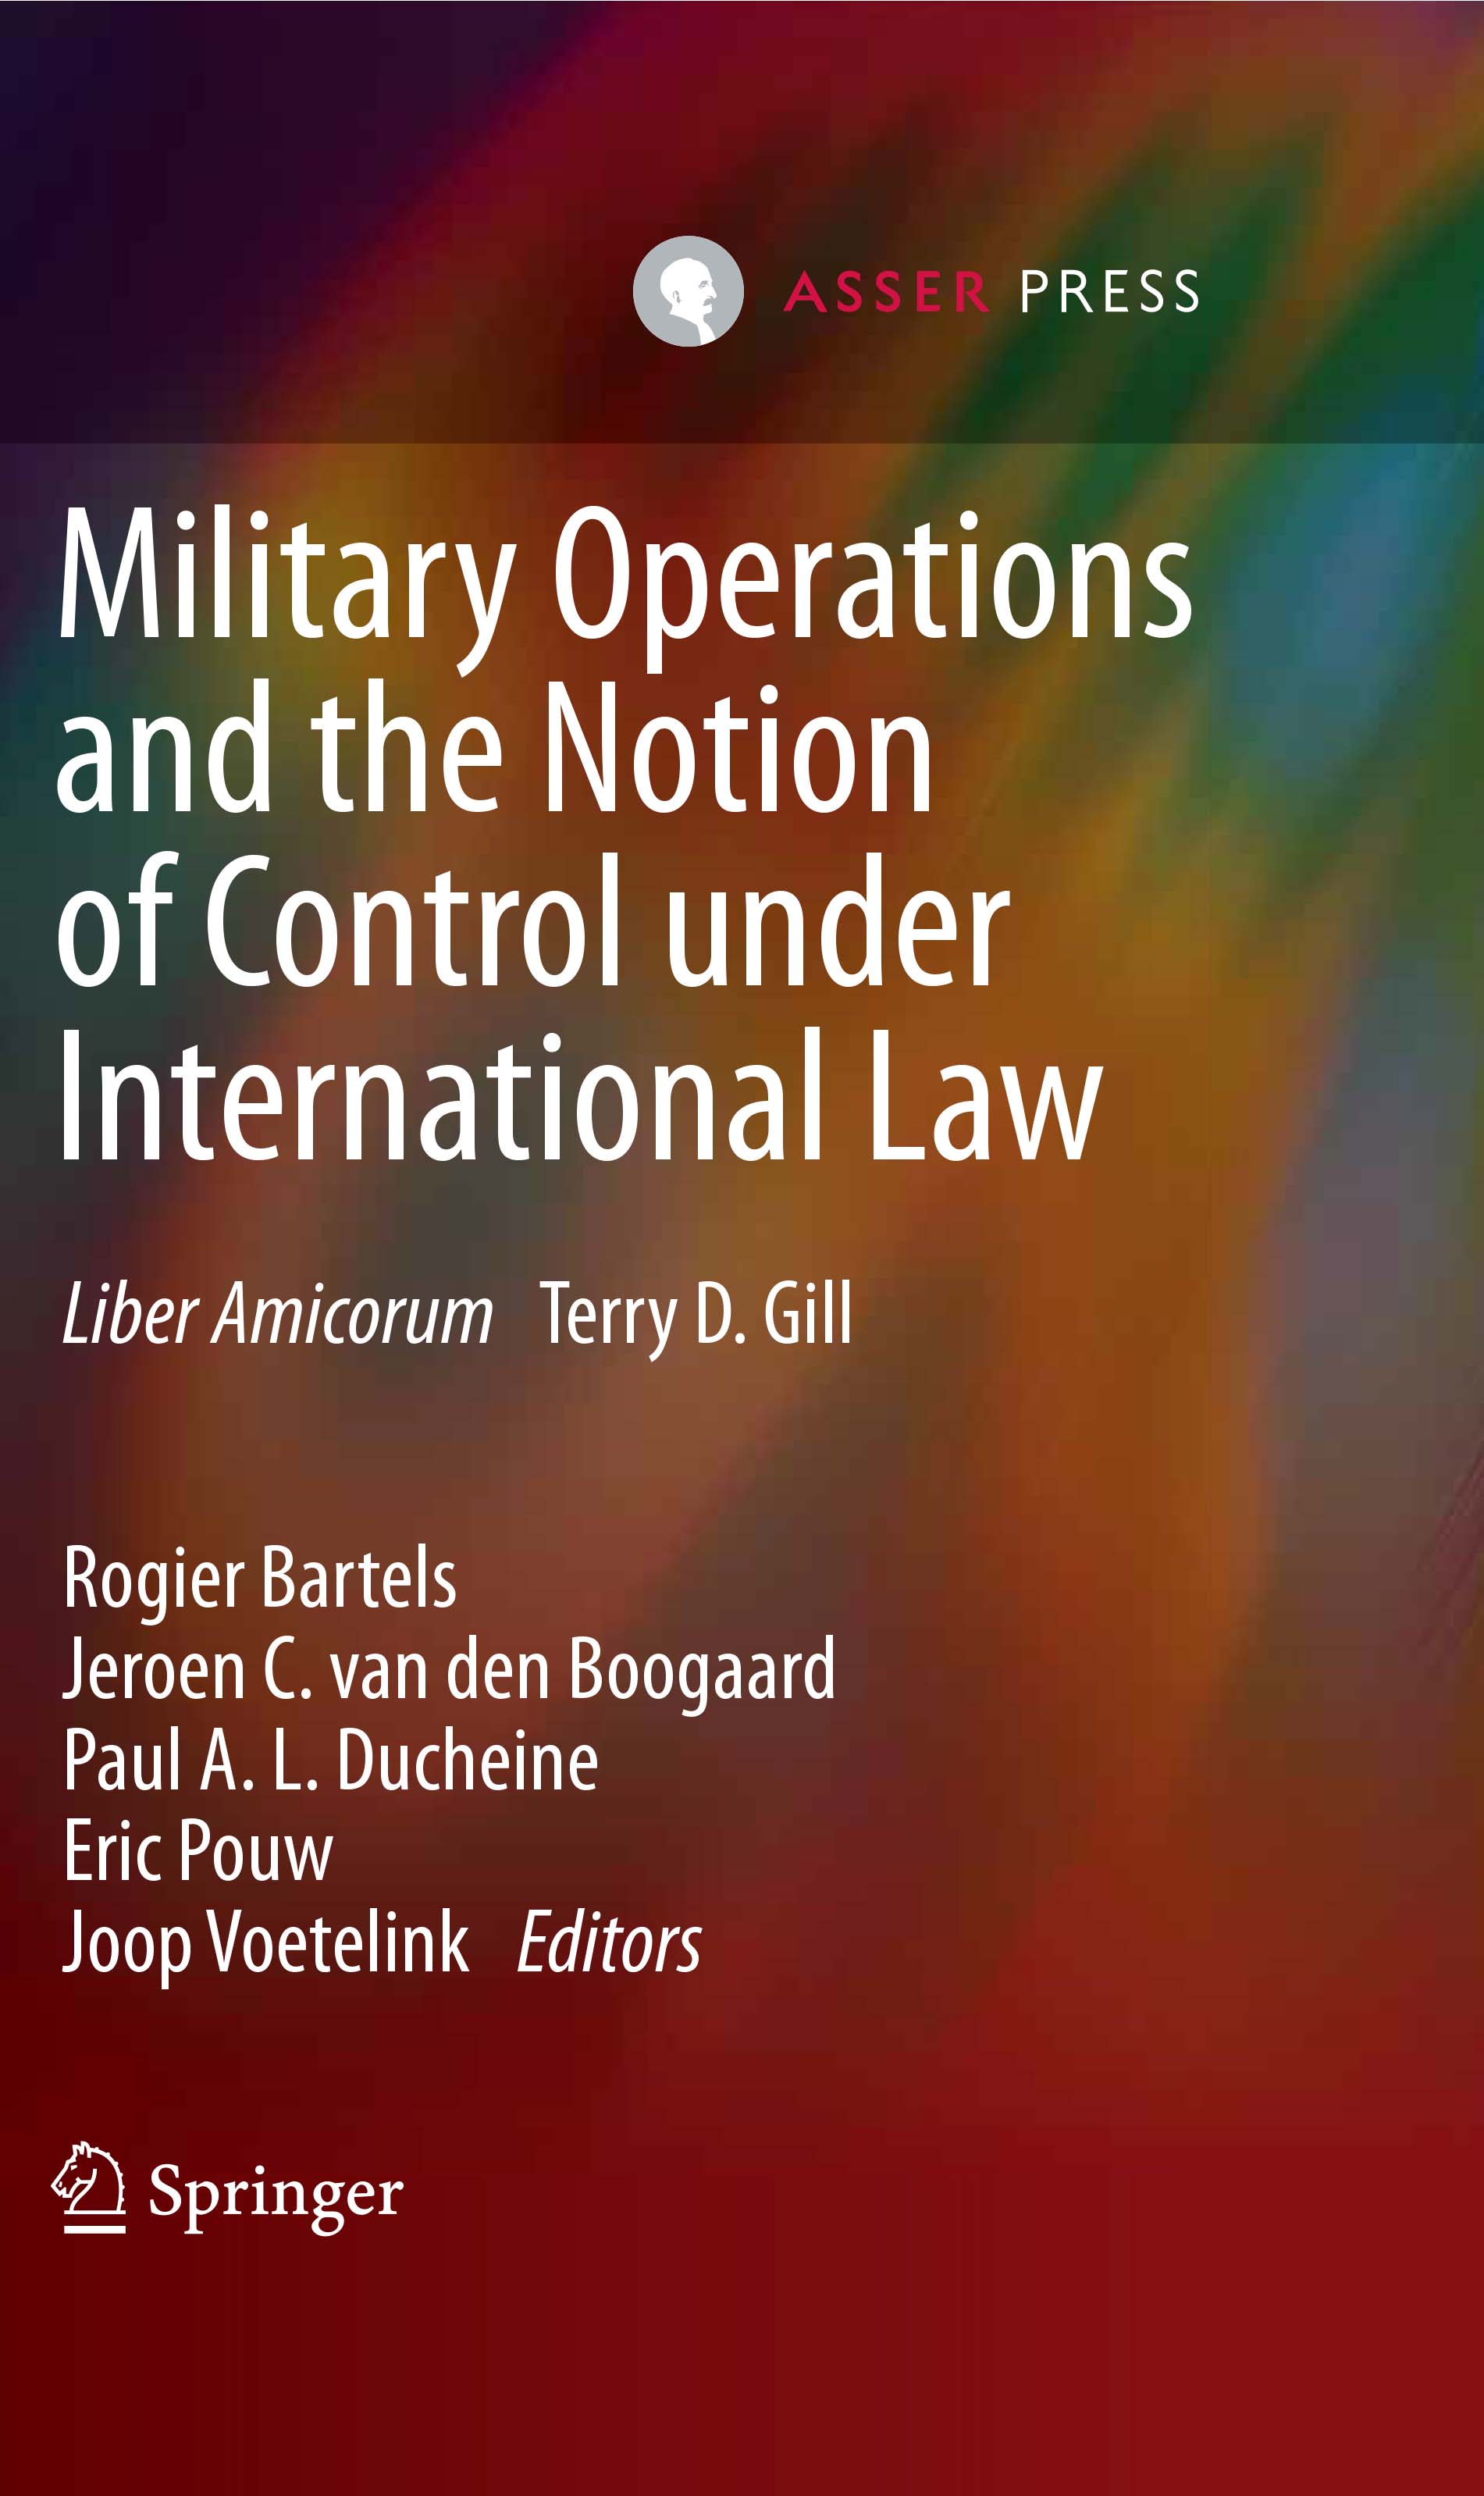 Military Operations and the Notion of Control under International Law - Liber Amicorum Terry D. Gill